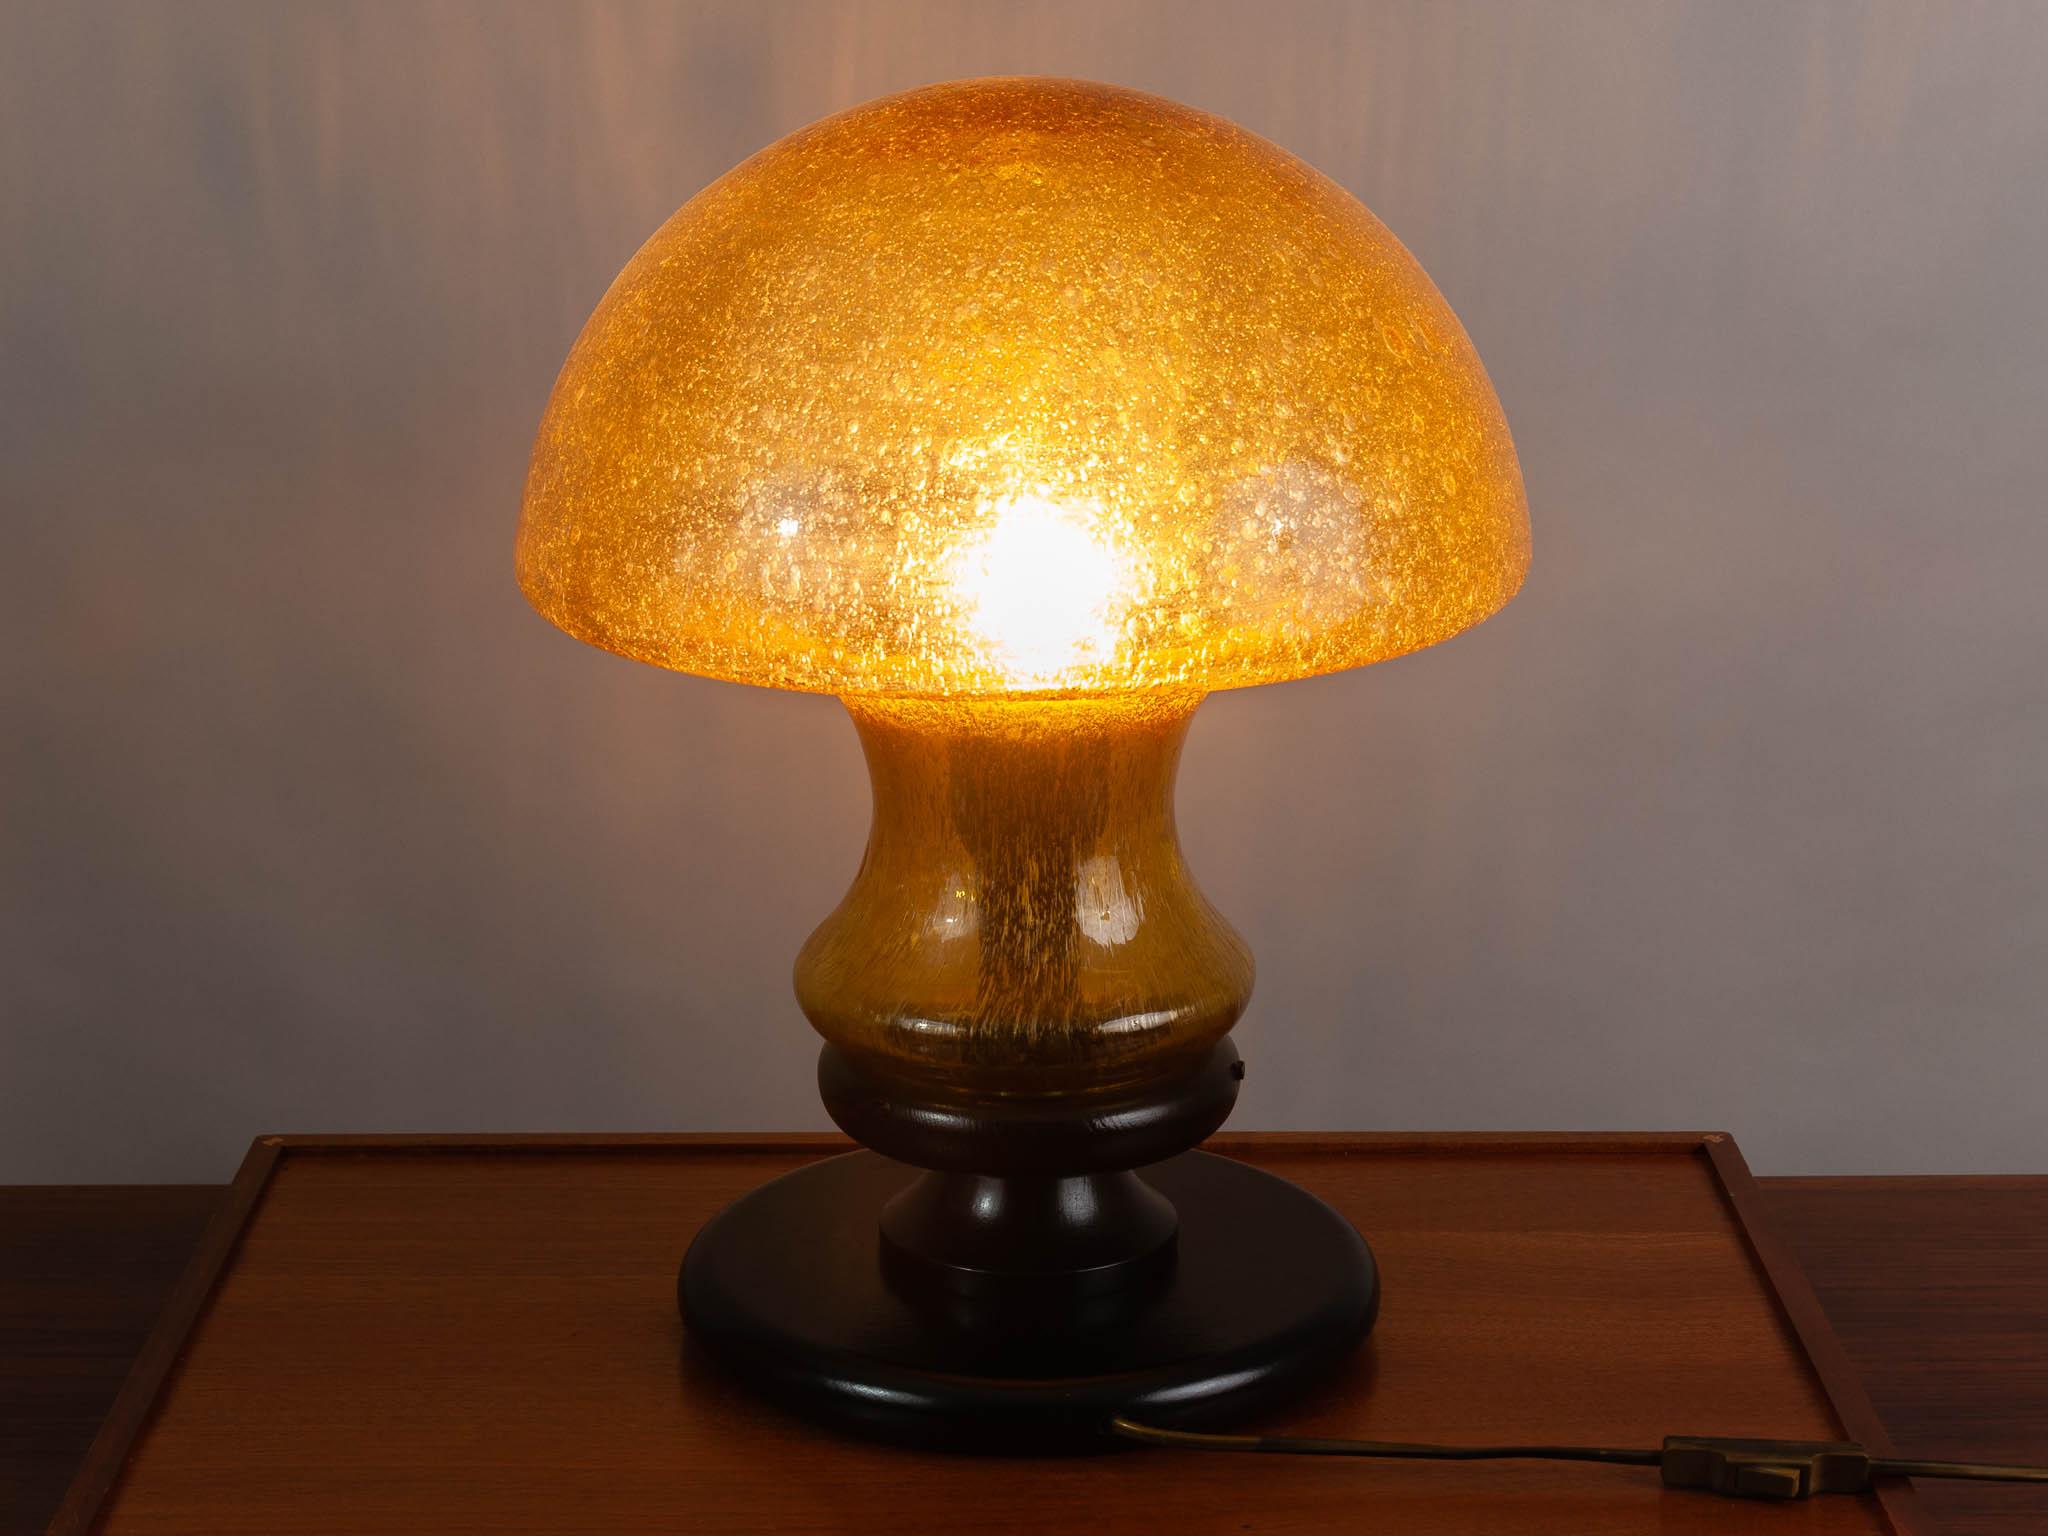 Vintage 1970s German mushroom table lamp by Doria Leuchten. The hand blown, dark-amber, bubbled glass, mushroom domed shade, sits on a black wooden base. The base and the shade are held in place with three screws which are easily released to allow